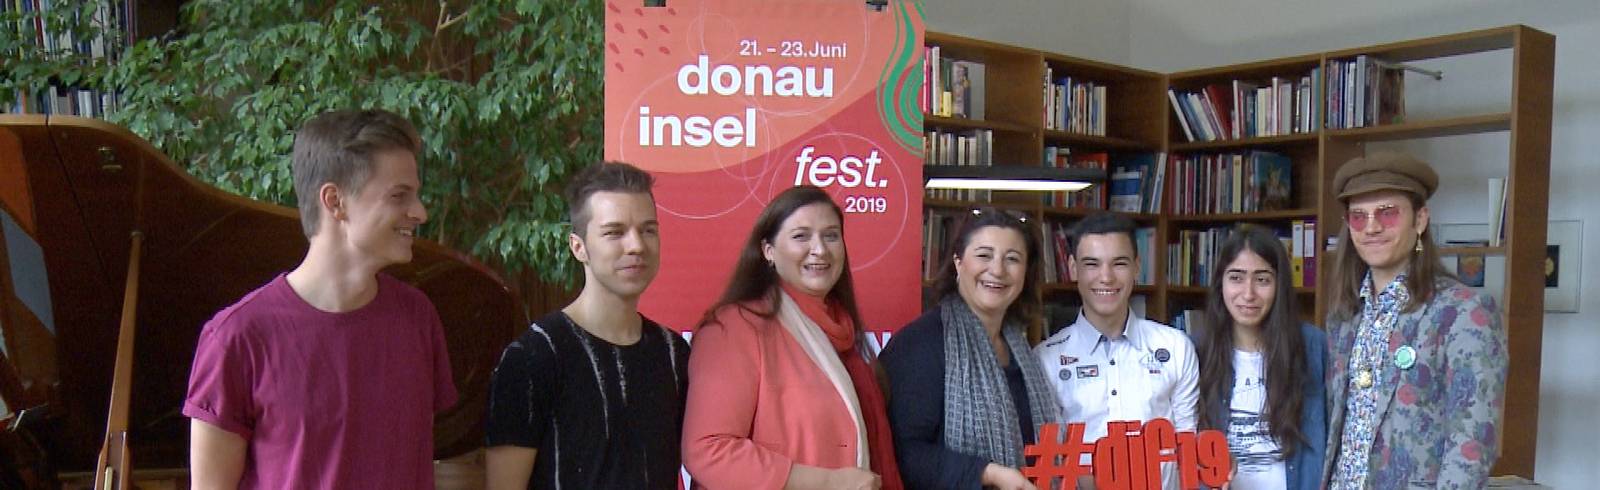 Donauinselfest: Newcomer made in Austria